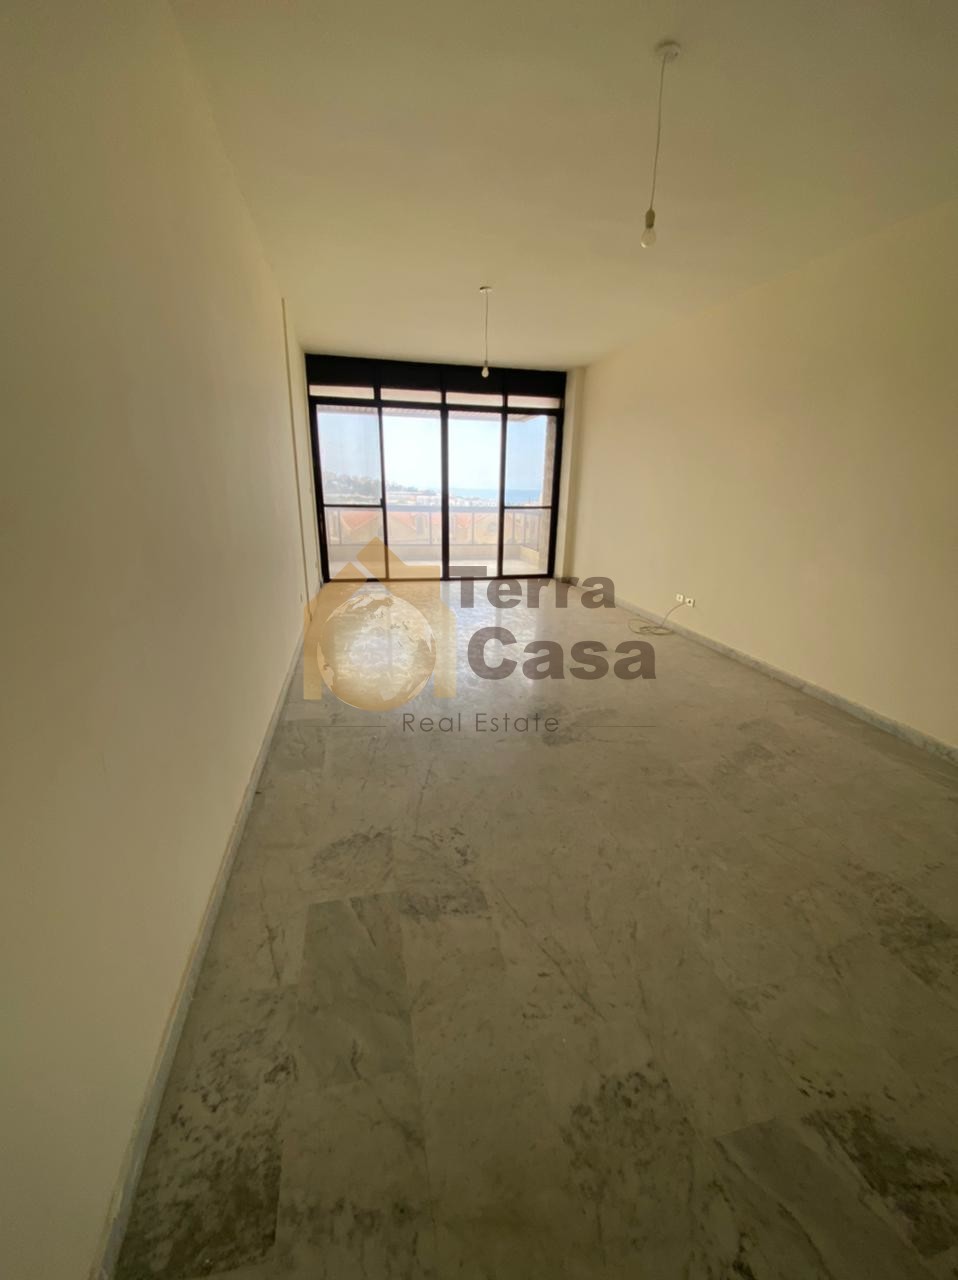 Mansourieh decorated apartment for rent .